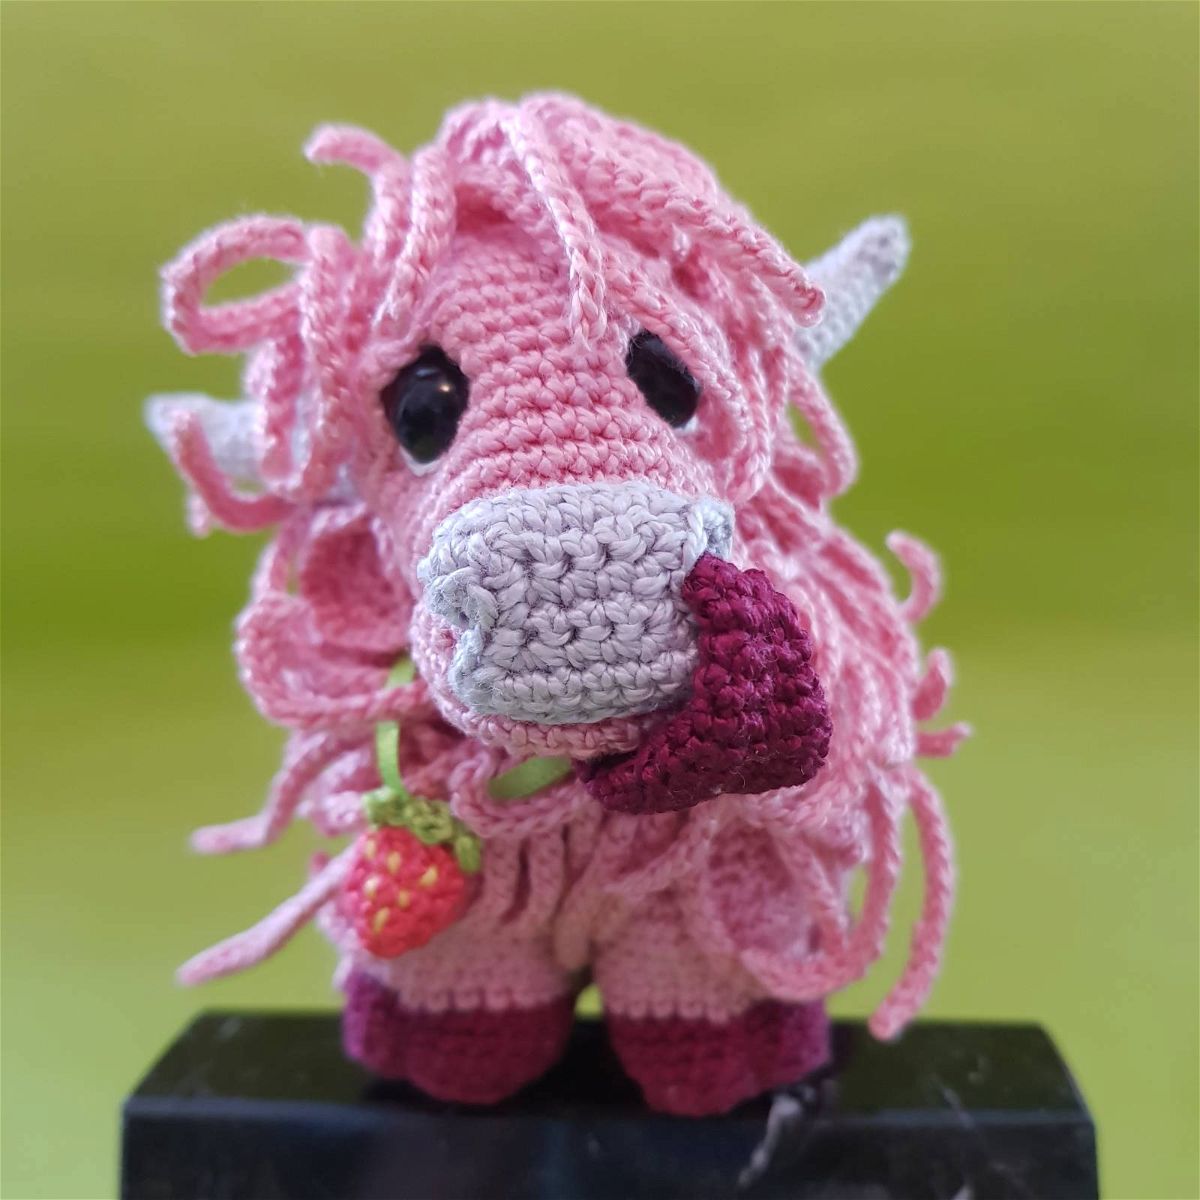 Strawberry Crochet Highland Cow Pattern Review by Fran for Cottontail Whiskers